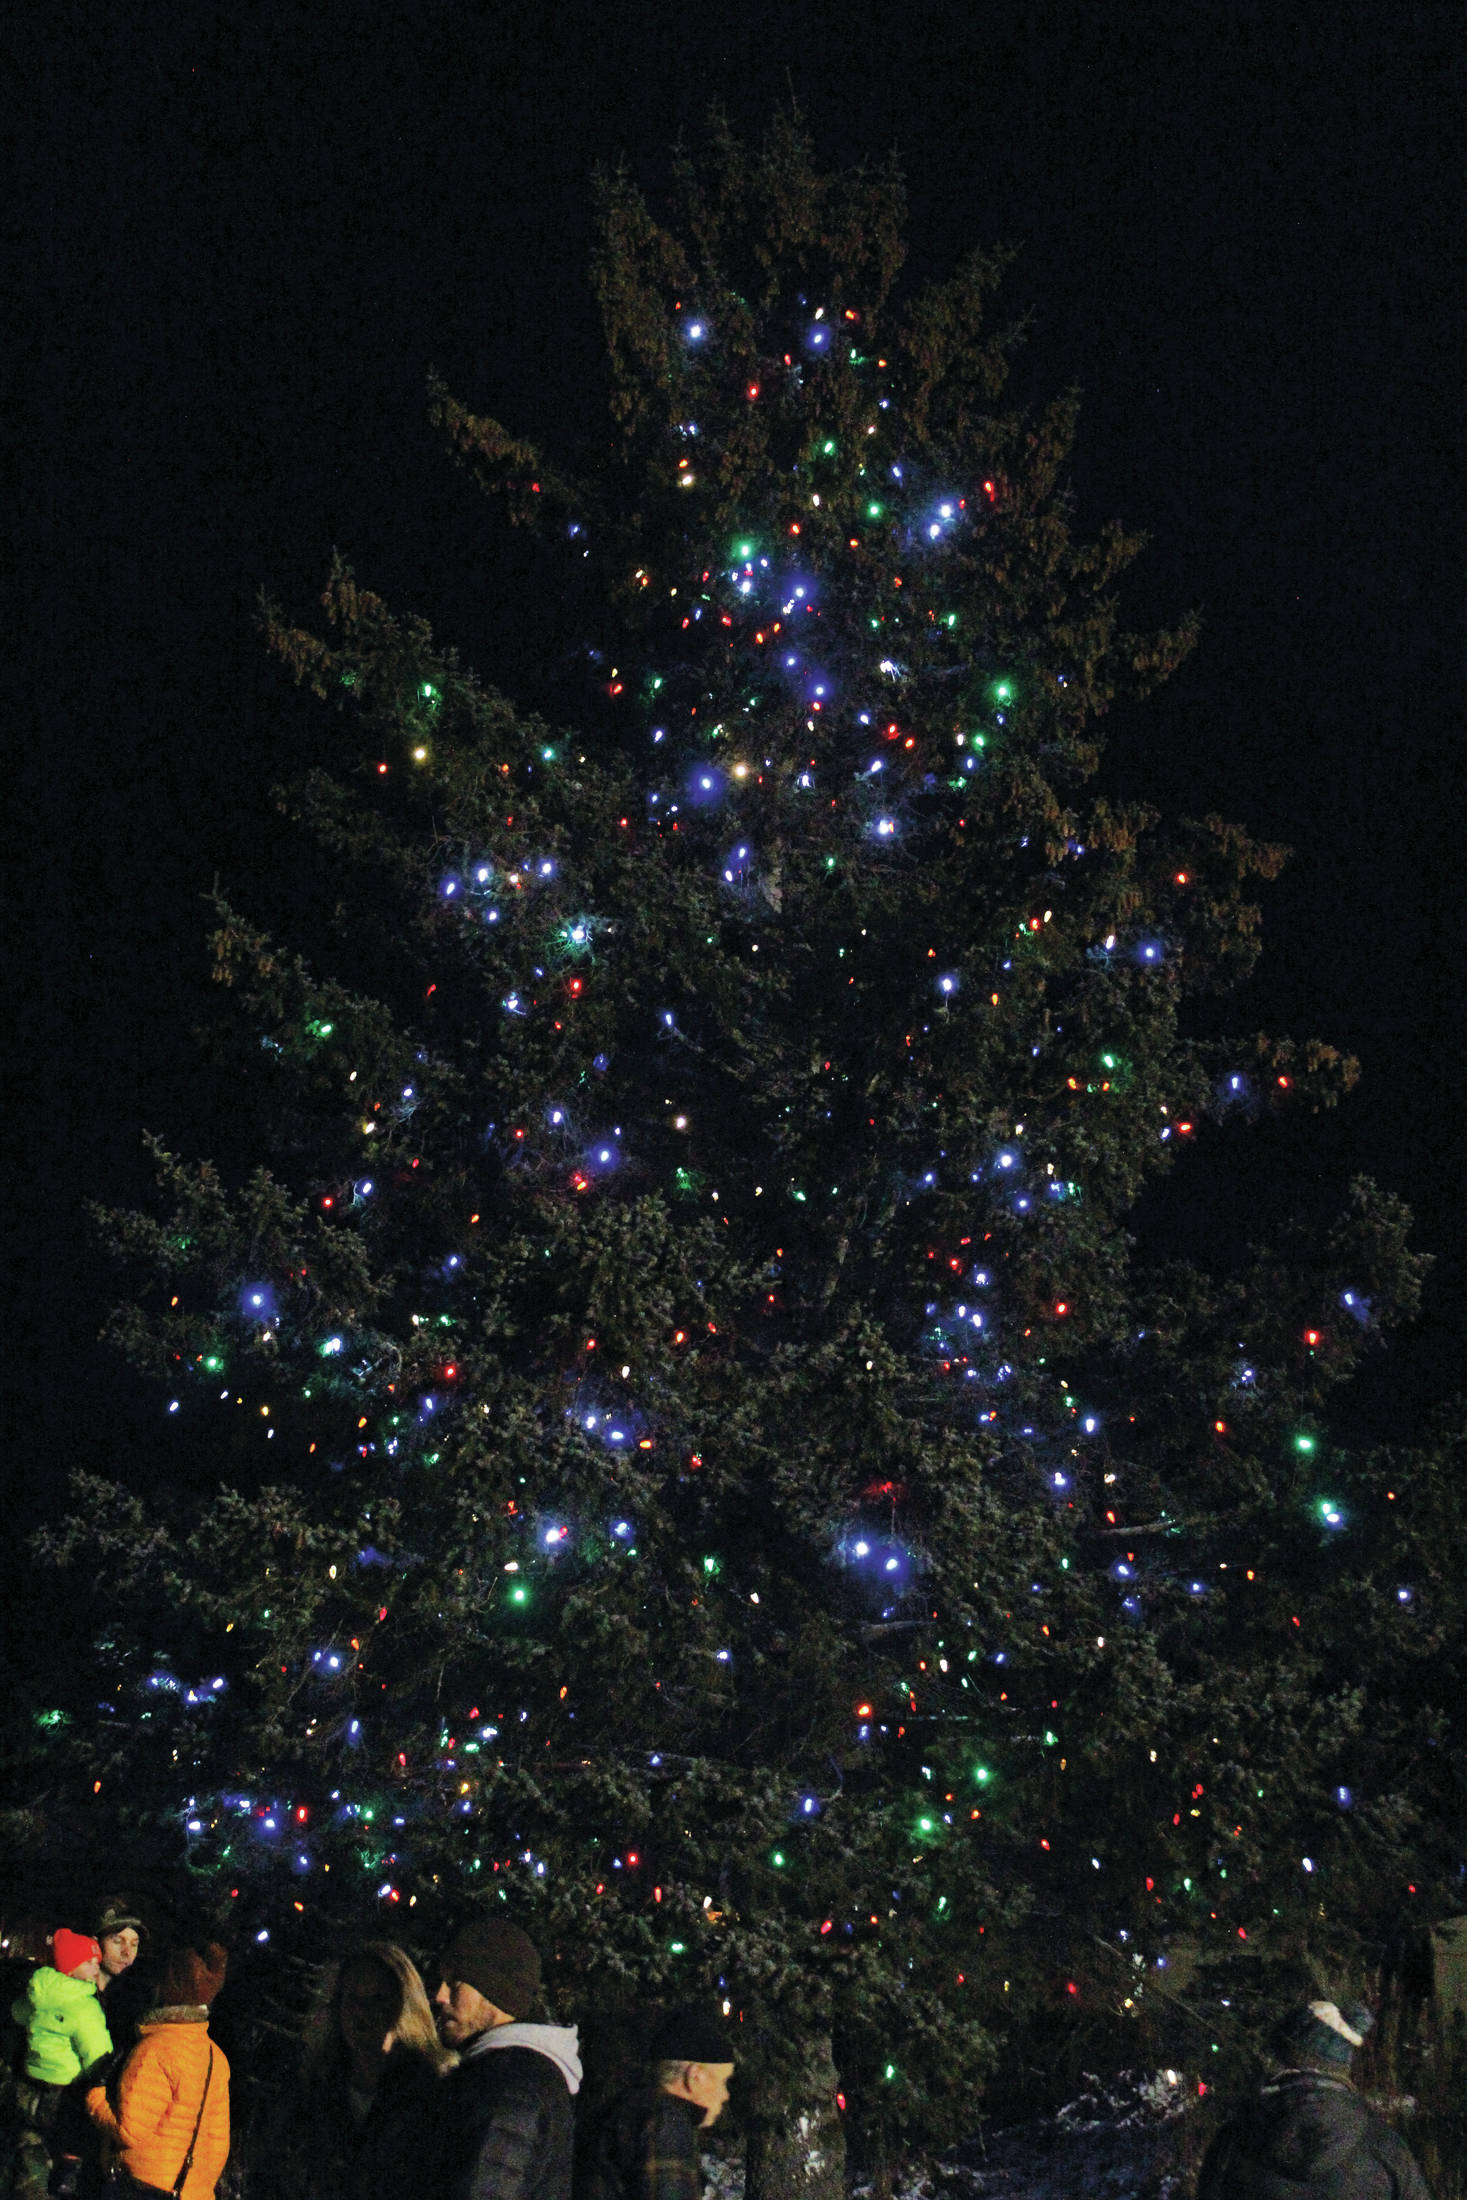 The holiday tree outside the Homer Chamber of Commerce and Visitor Center lights up for the first time this season on Thursday, Dec. 5, 2019 at the chamber and visitor center in Homer, Alaska. Mayor Ken Castner turned the lights on while community members enjoyed s’mores, hot chocolate and carols from the Homer Swing Choir. (Photo by Megan Pacer/Homer News)